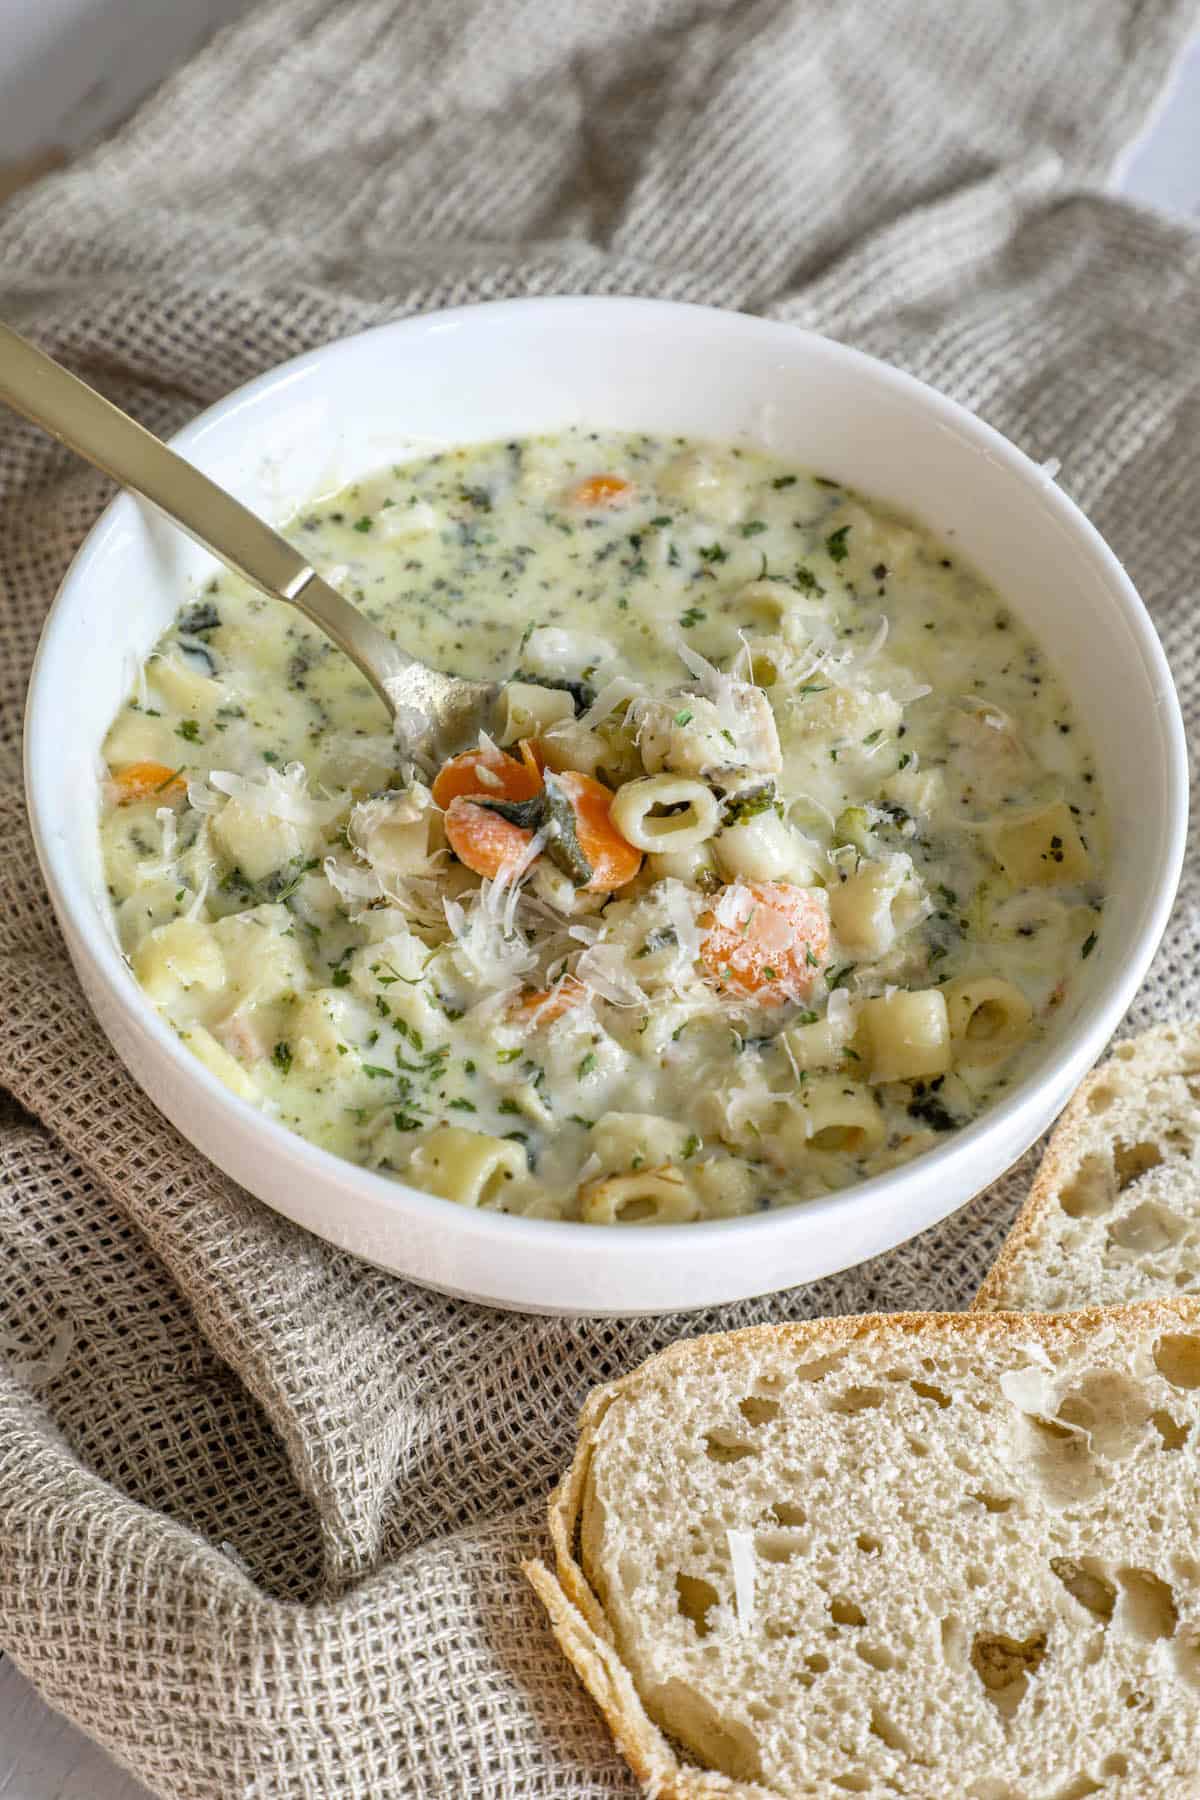 A creamy bowl of chicken noodle soup with bread next to it.